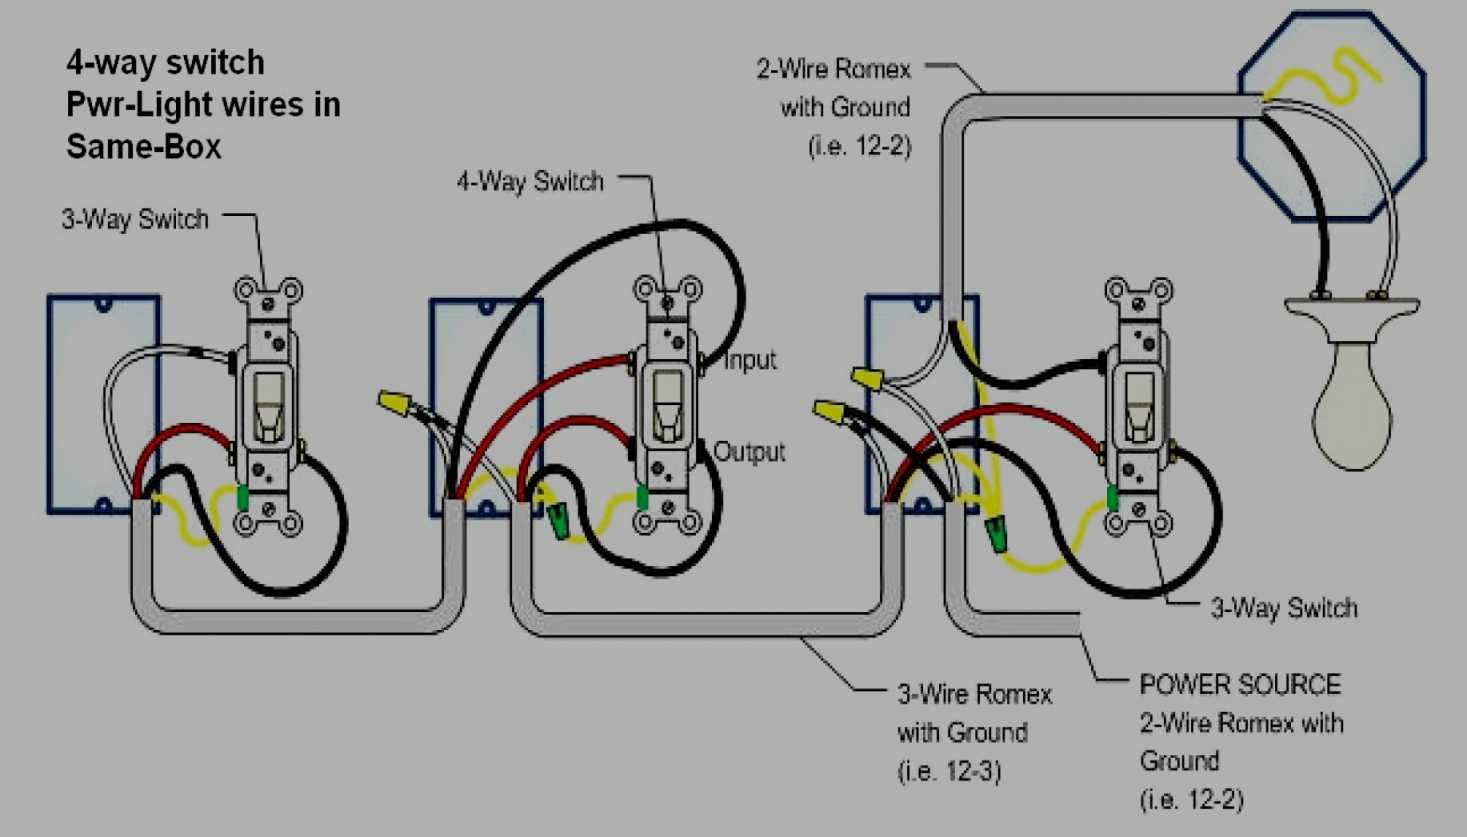 4 Way Switch Diagram Electrical Schematic To 4 Wire Romex Diagram Wiring Diagram Directory